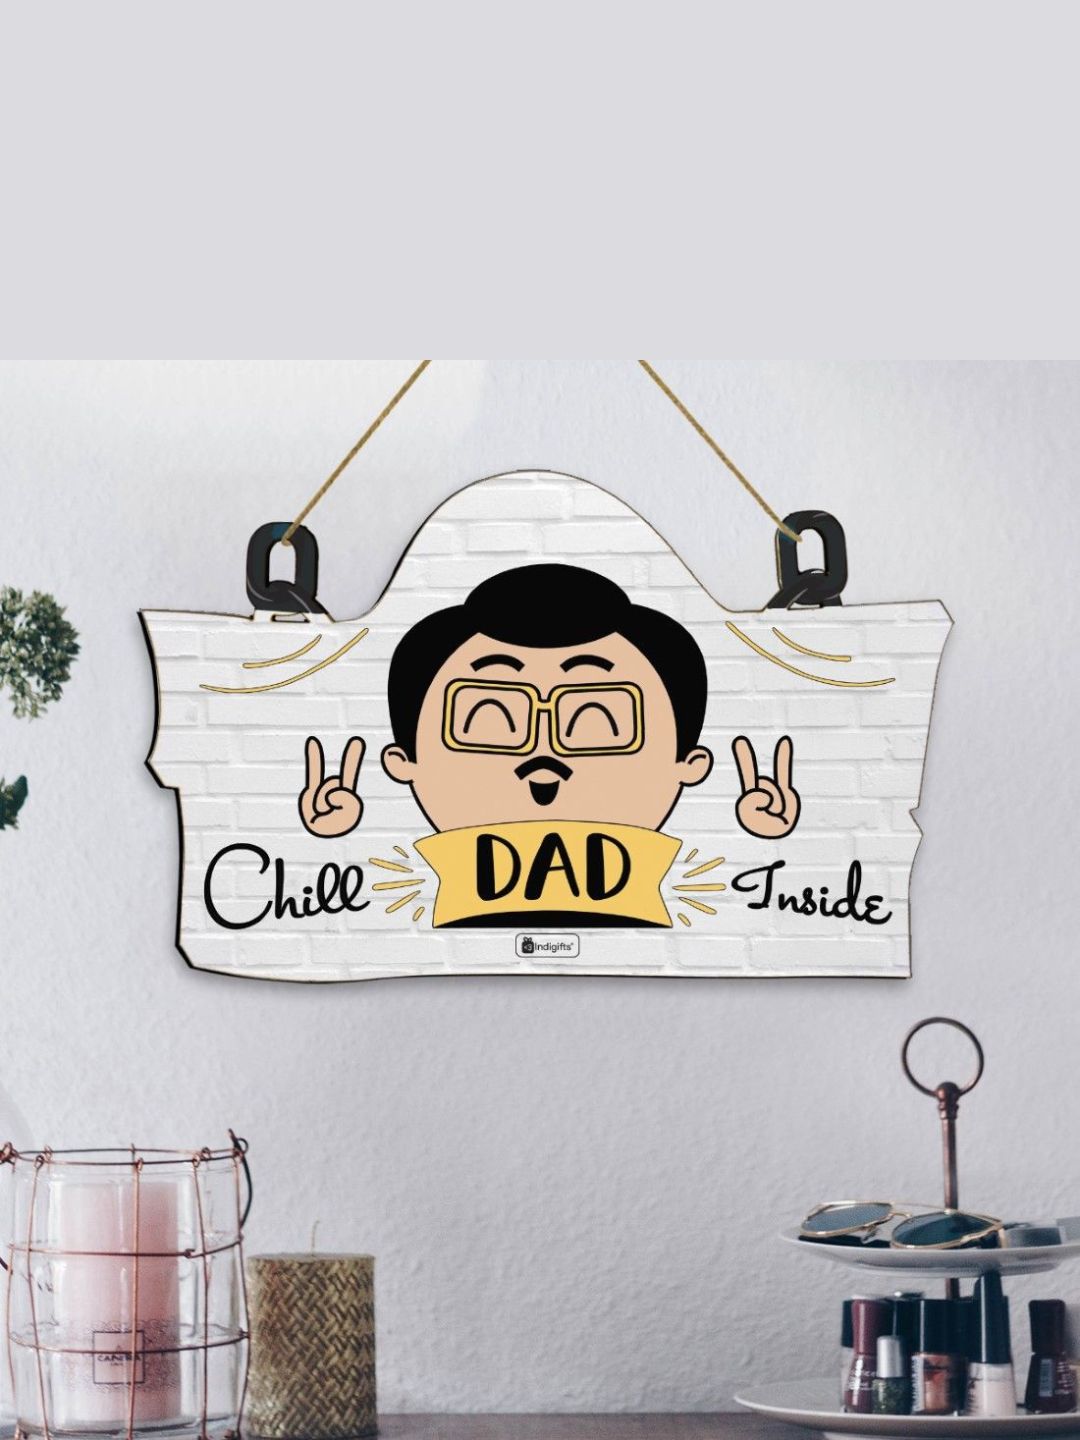 Indigifts Chill Dad Inside Wall Hanging 11.05×7 Inch- Wall Hanging D?cor, Wall Hanging for Home Decoration, Birthday Gift for Cool Dad